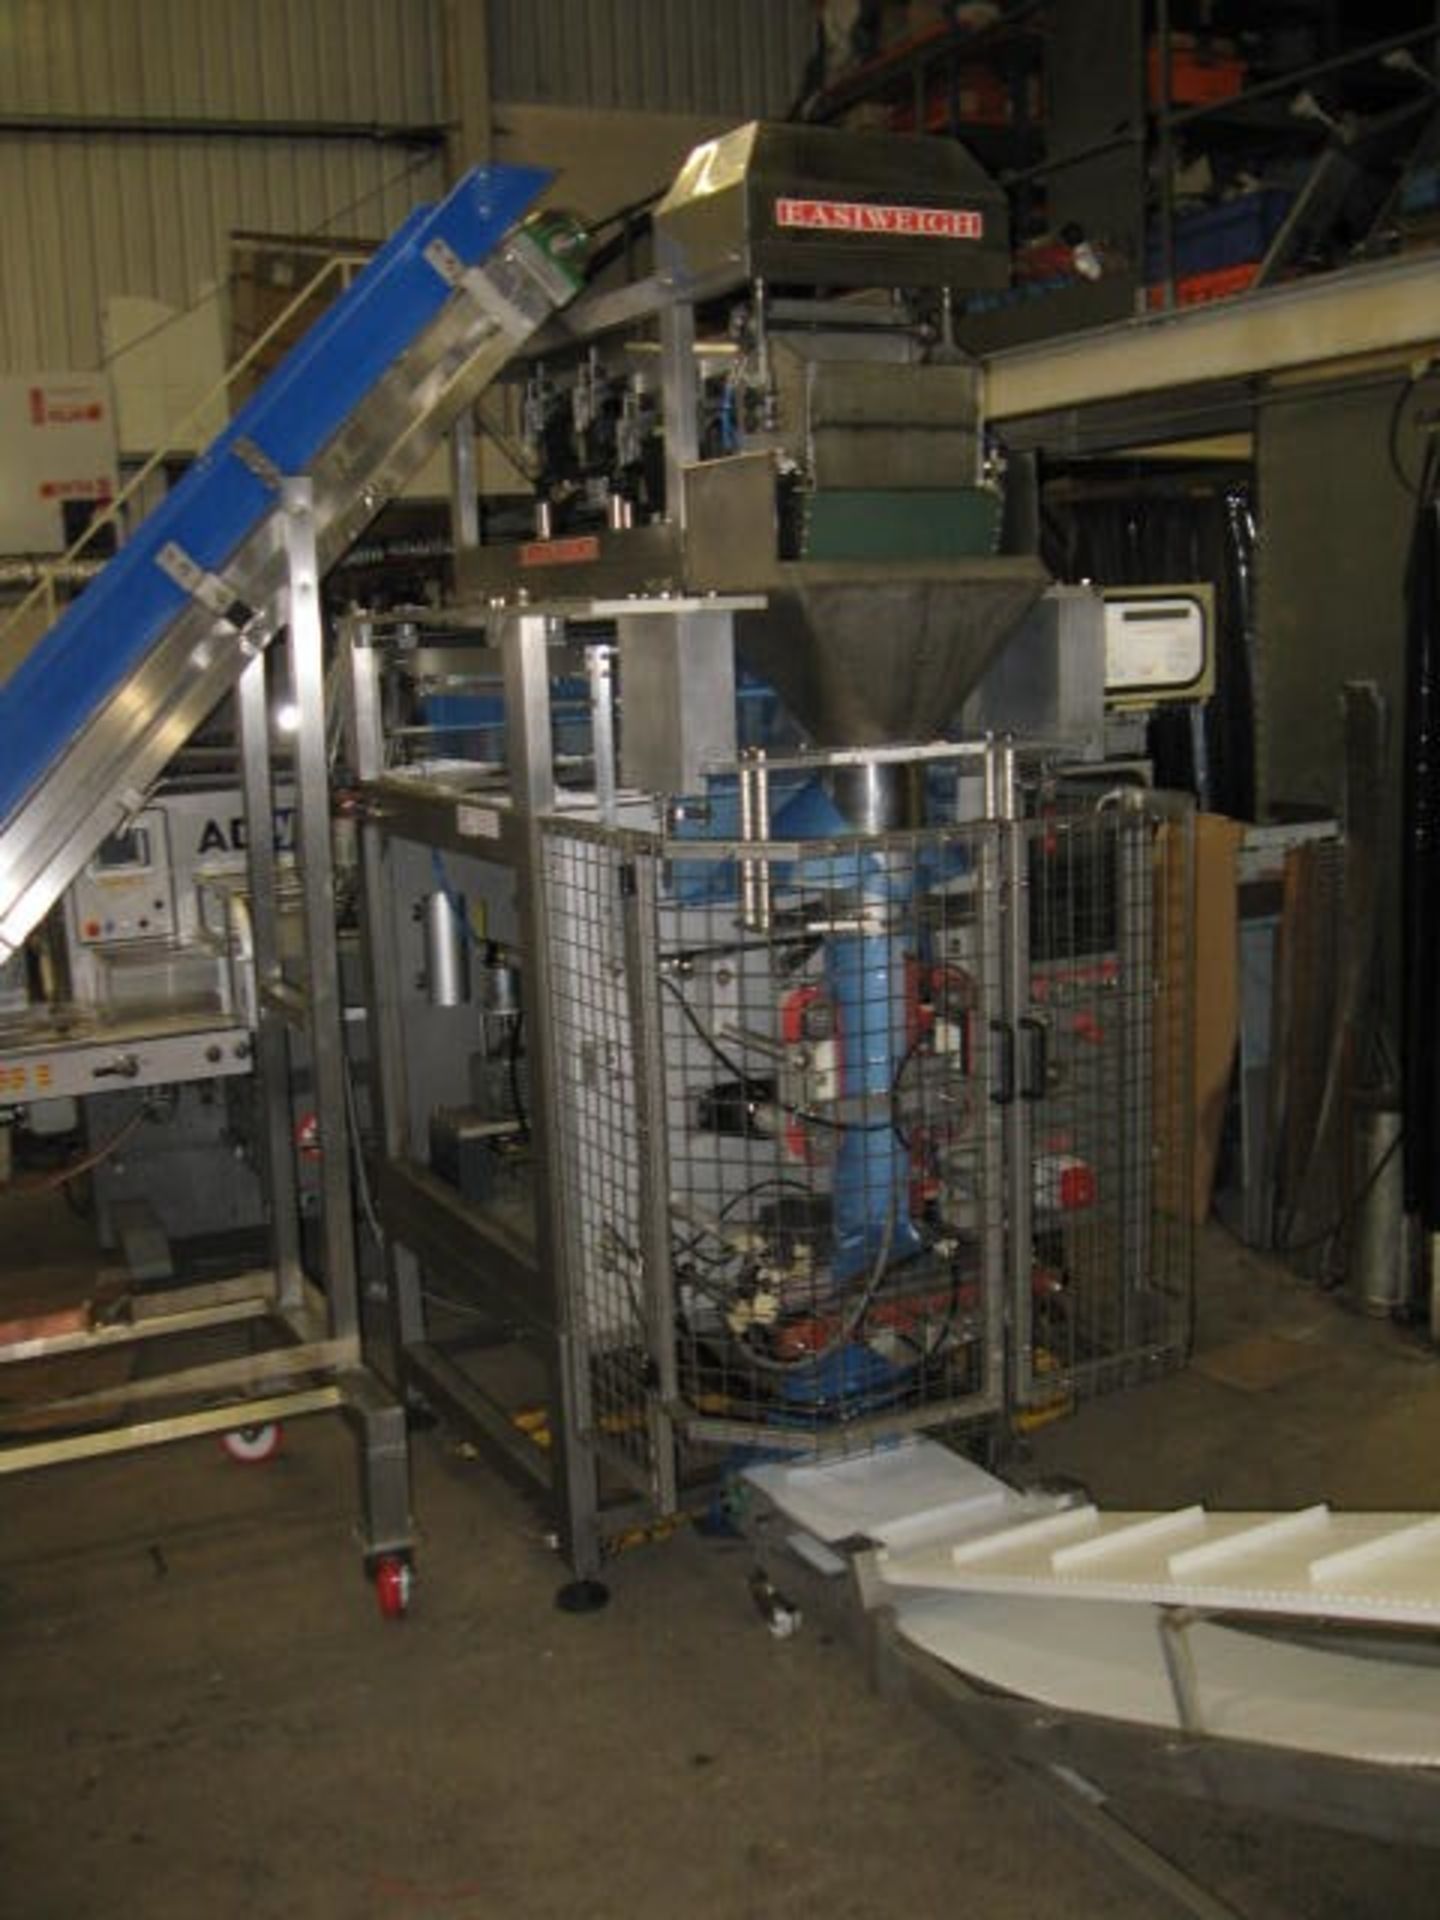 EASIWEIGH LINEAR WEIGHER WITH INNOTECH VFFS BAGGER - Image 5 of 9